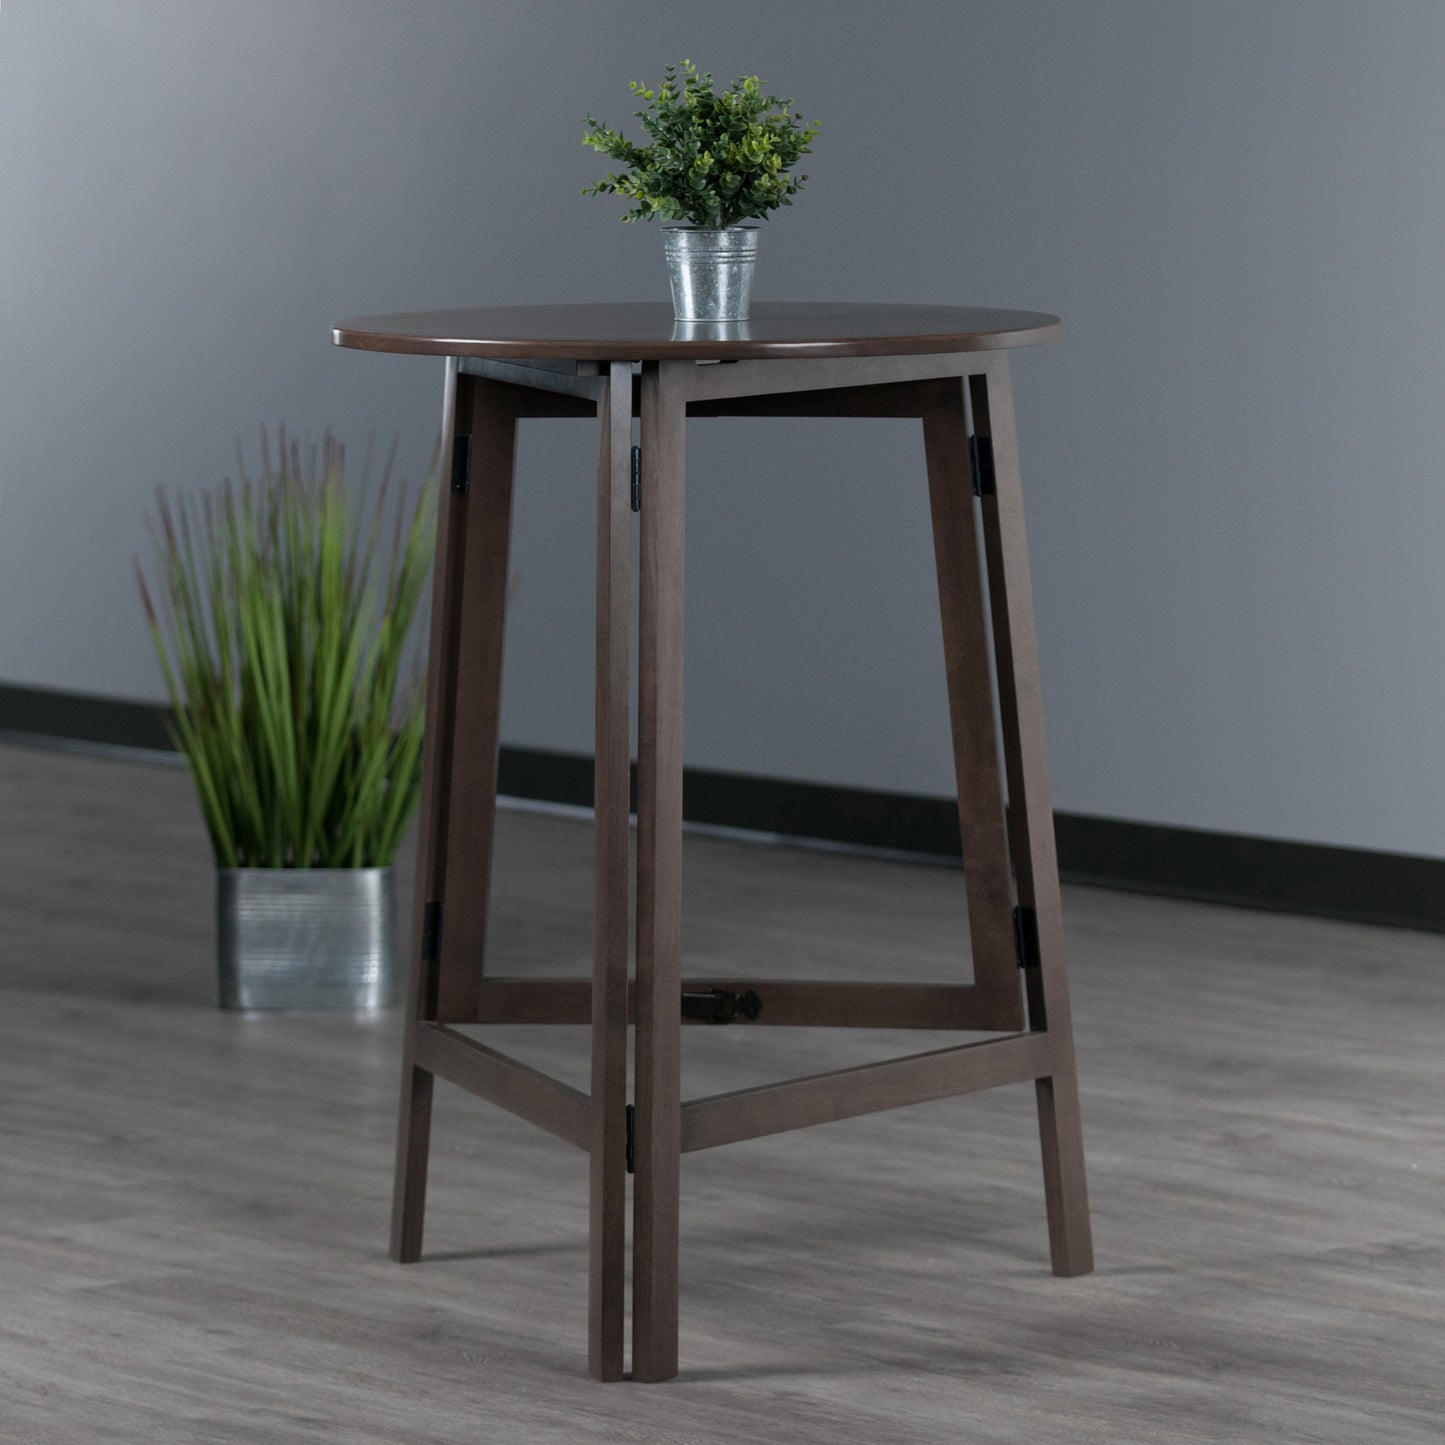 Winsome Wood Torrence Foldable High Table; Torrence Dining; 40 H; Oyster Gray